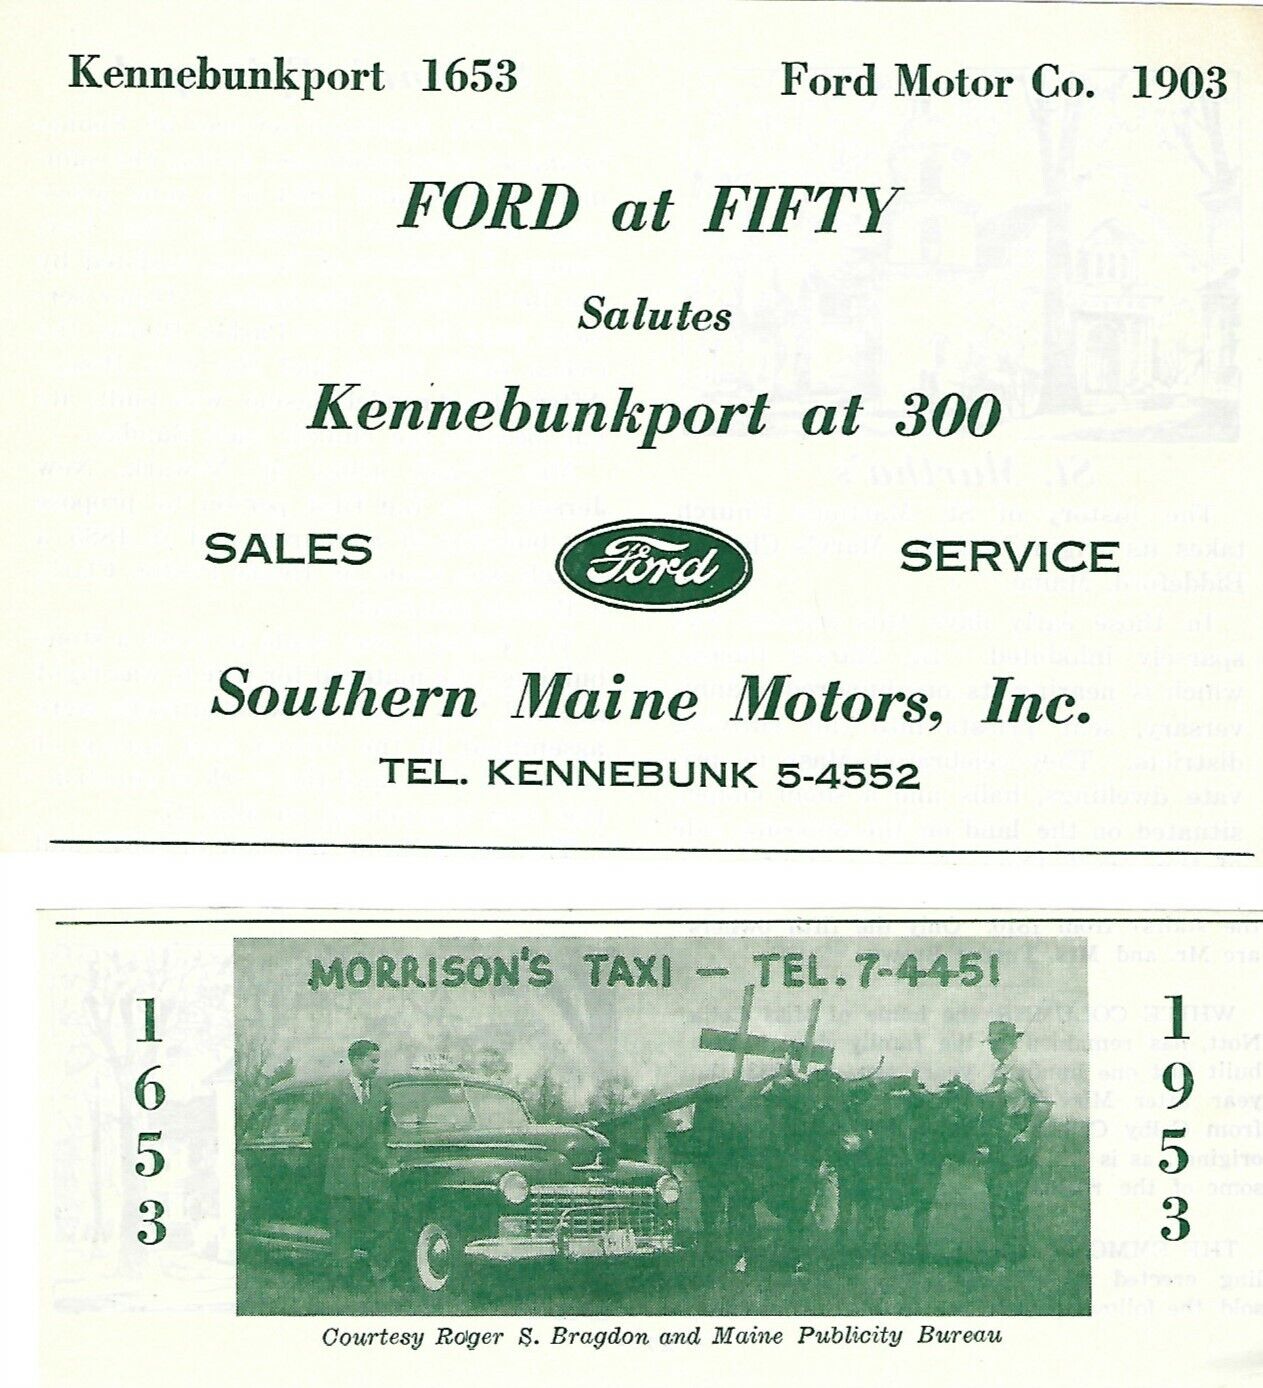 1953 Kennebunkport Maine Advertisements Ford at Fifty Morrison's Taxi